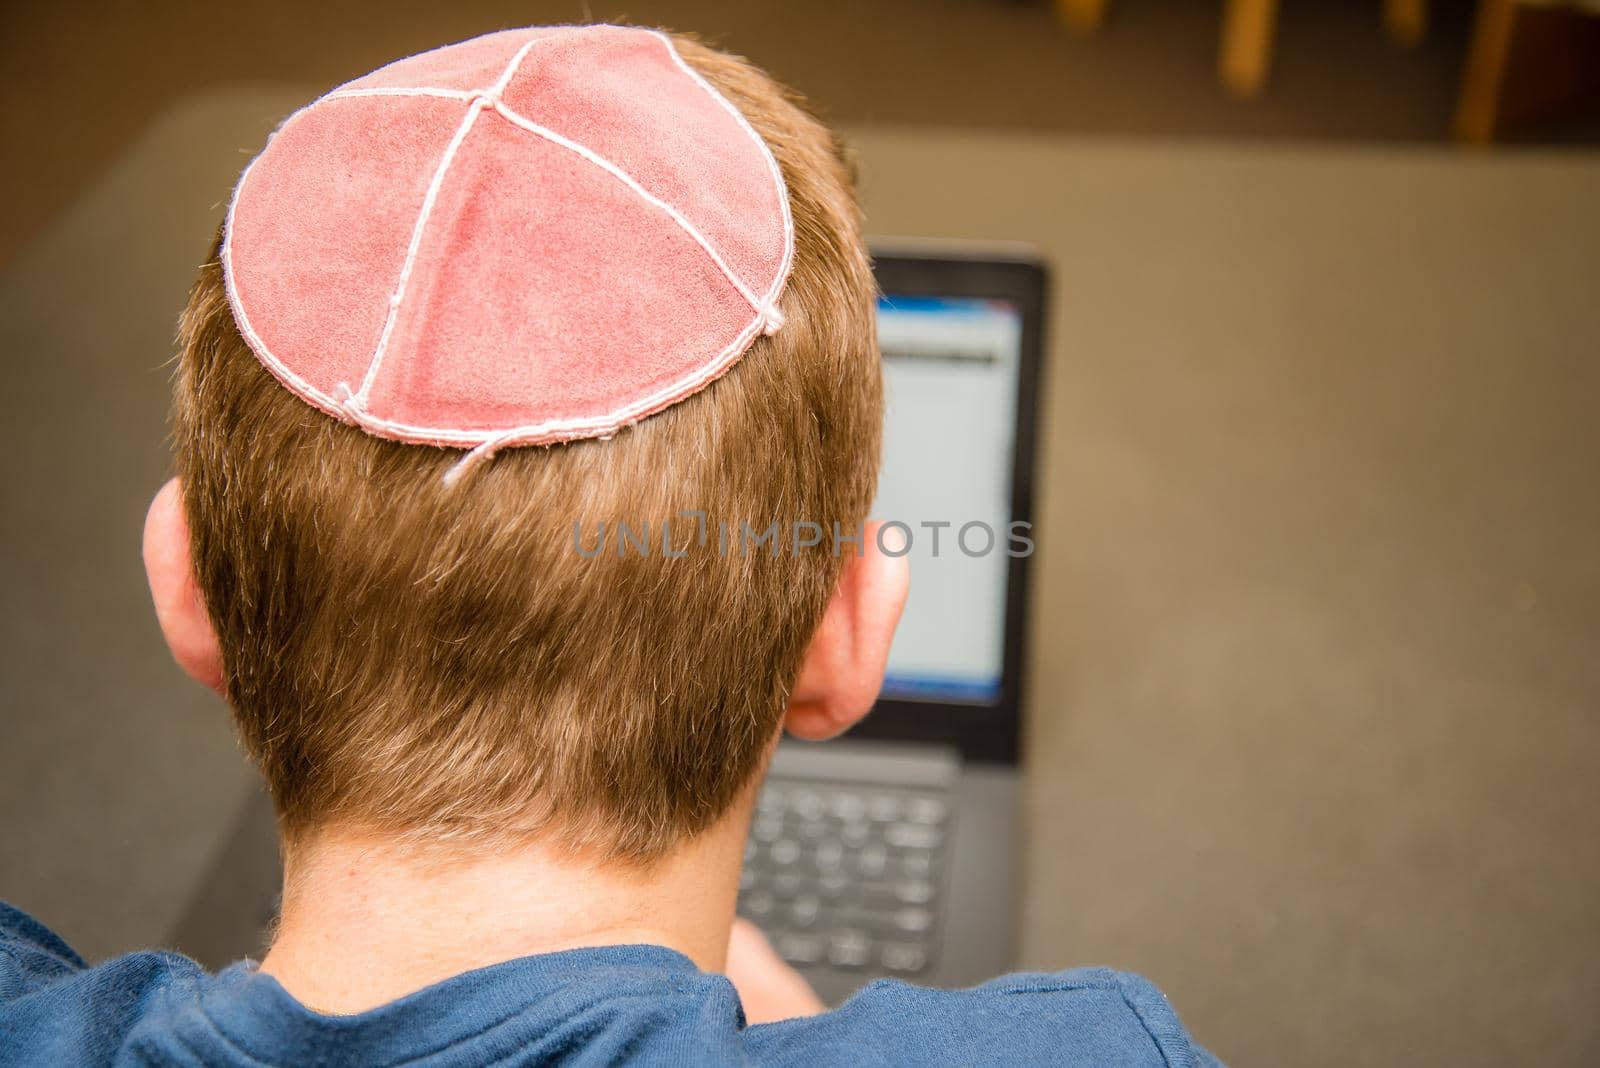 Young boy wearing a yarmulke from the back doing work on a laptop in a library with colorful books on shelves. by jyurinko